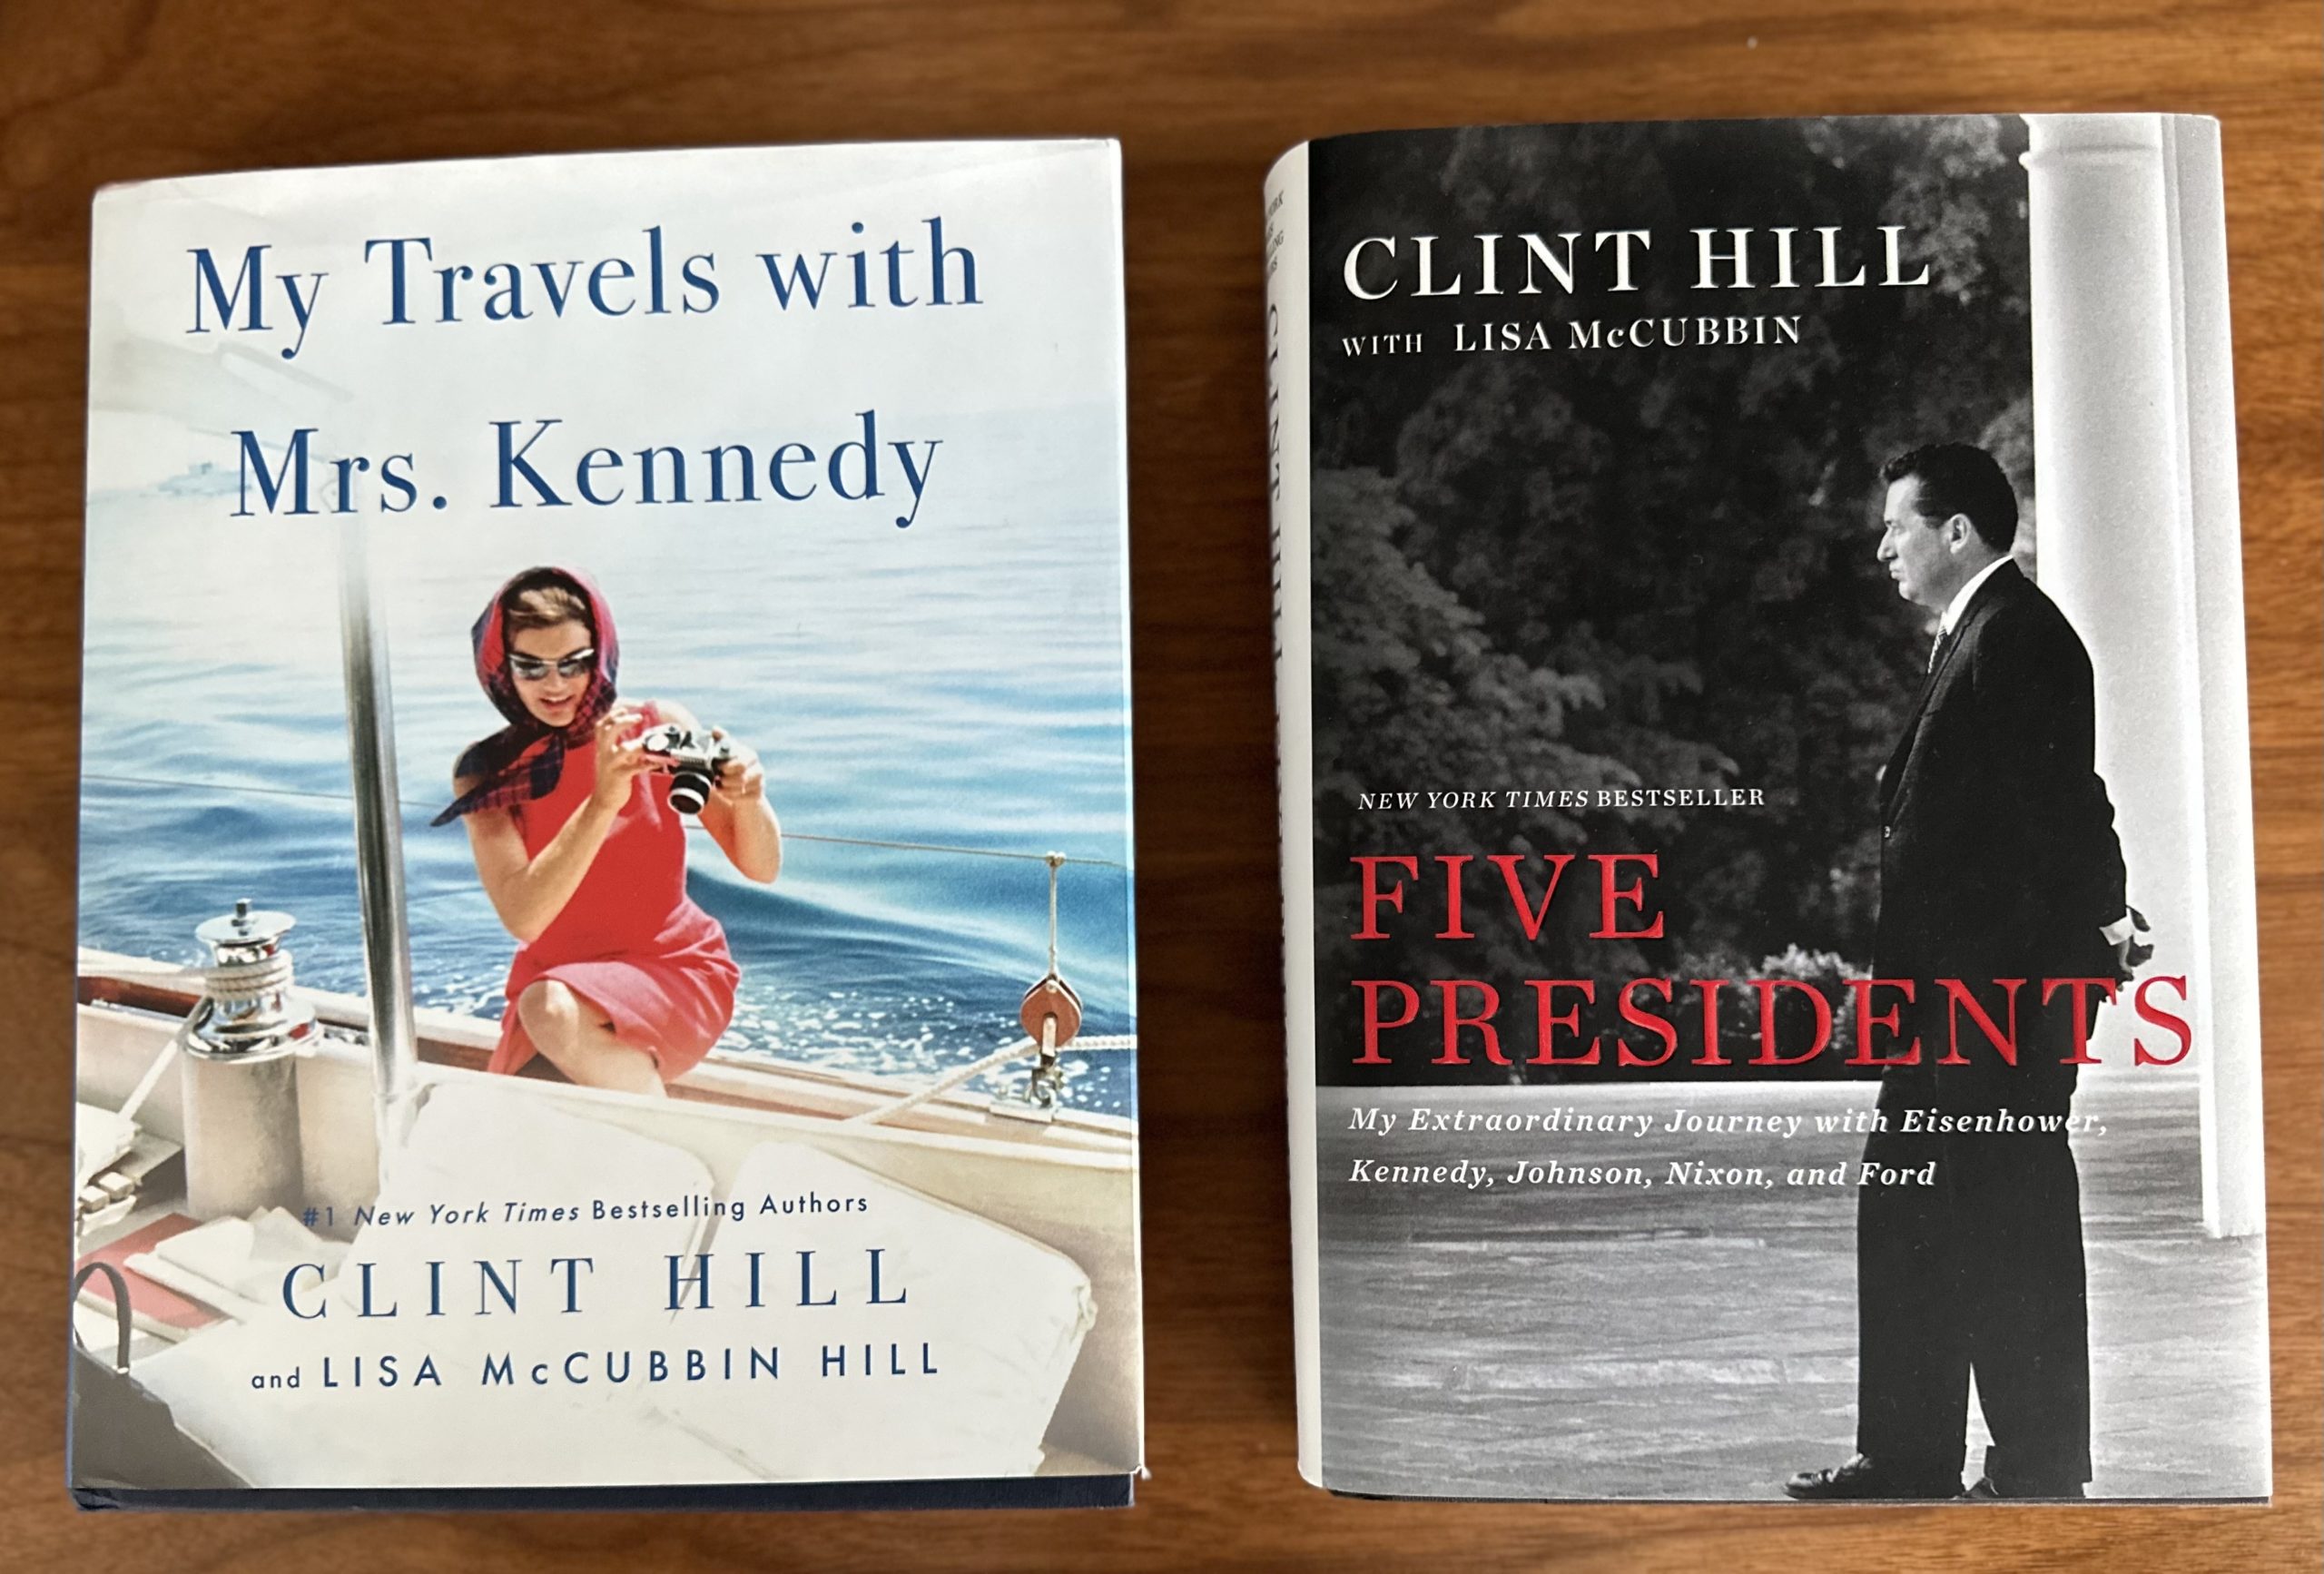 Two-book set by Clint Hill and Lisa McCubbin Hill